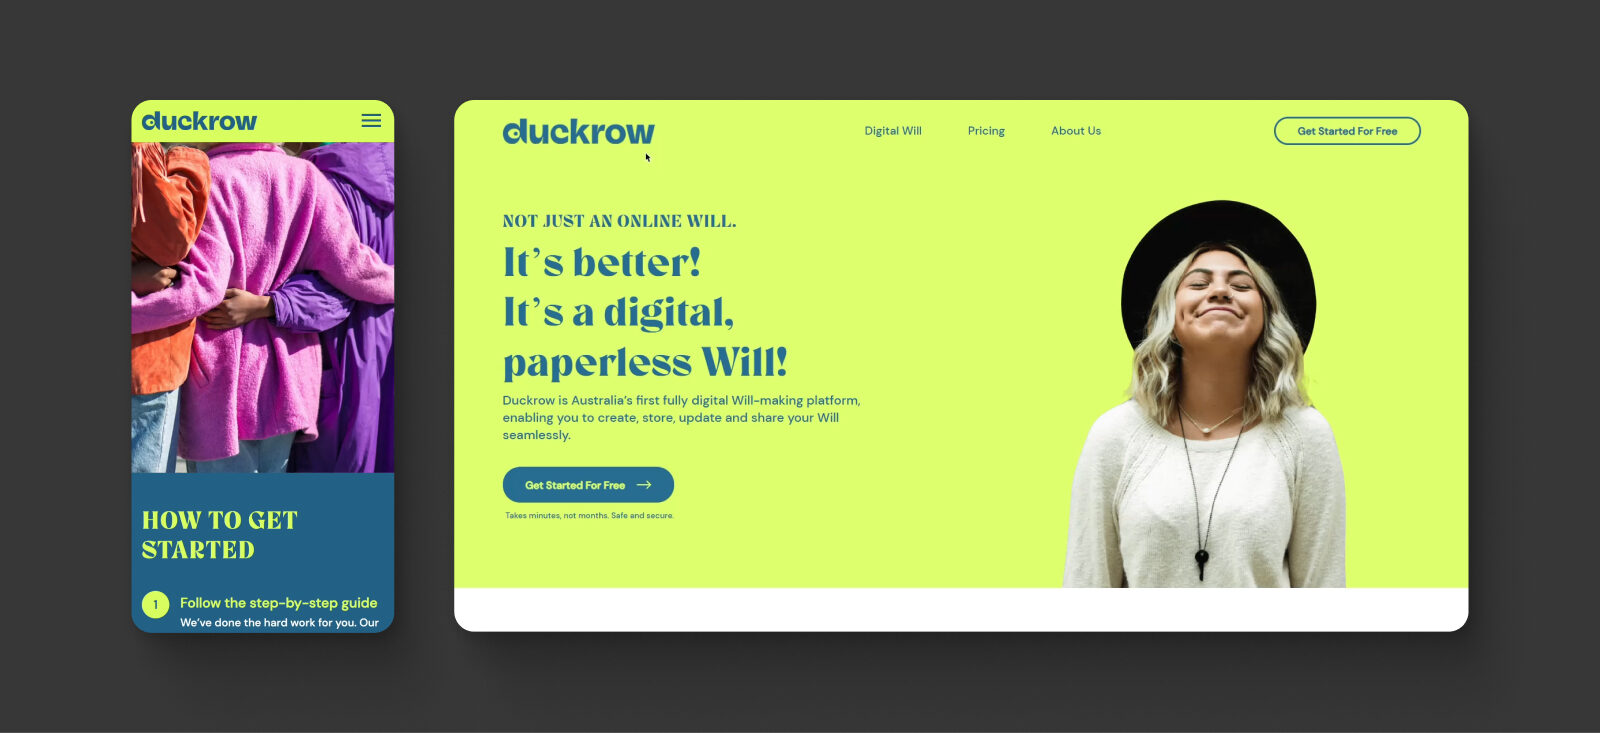 Left: A person holding a scarf. Right: A smiling person with closed eyes. Text: "Duckrow - Not just an online will. It’s a digital, paperless will!" and "Get Started Free.